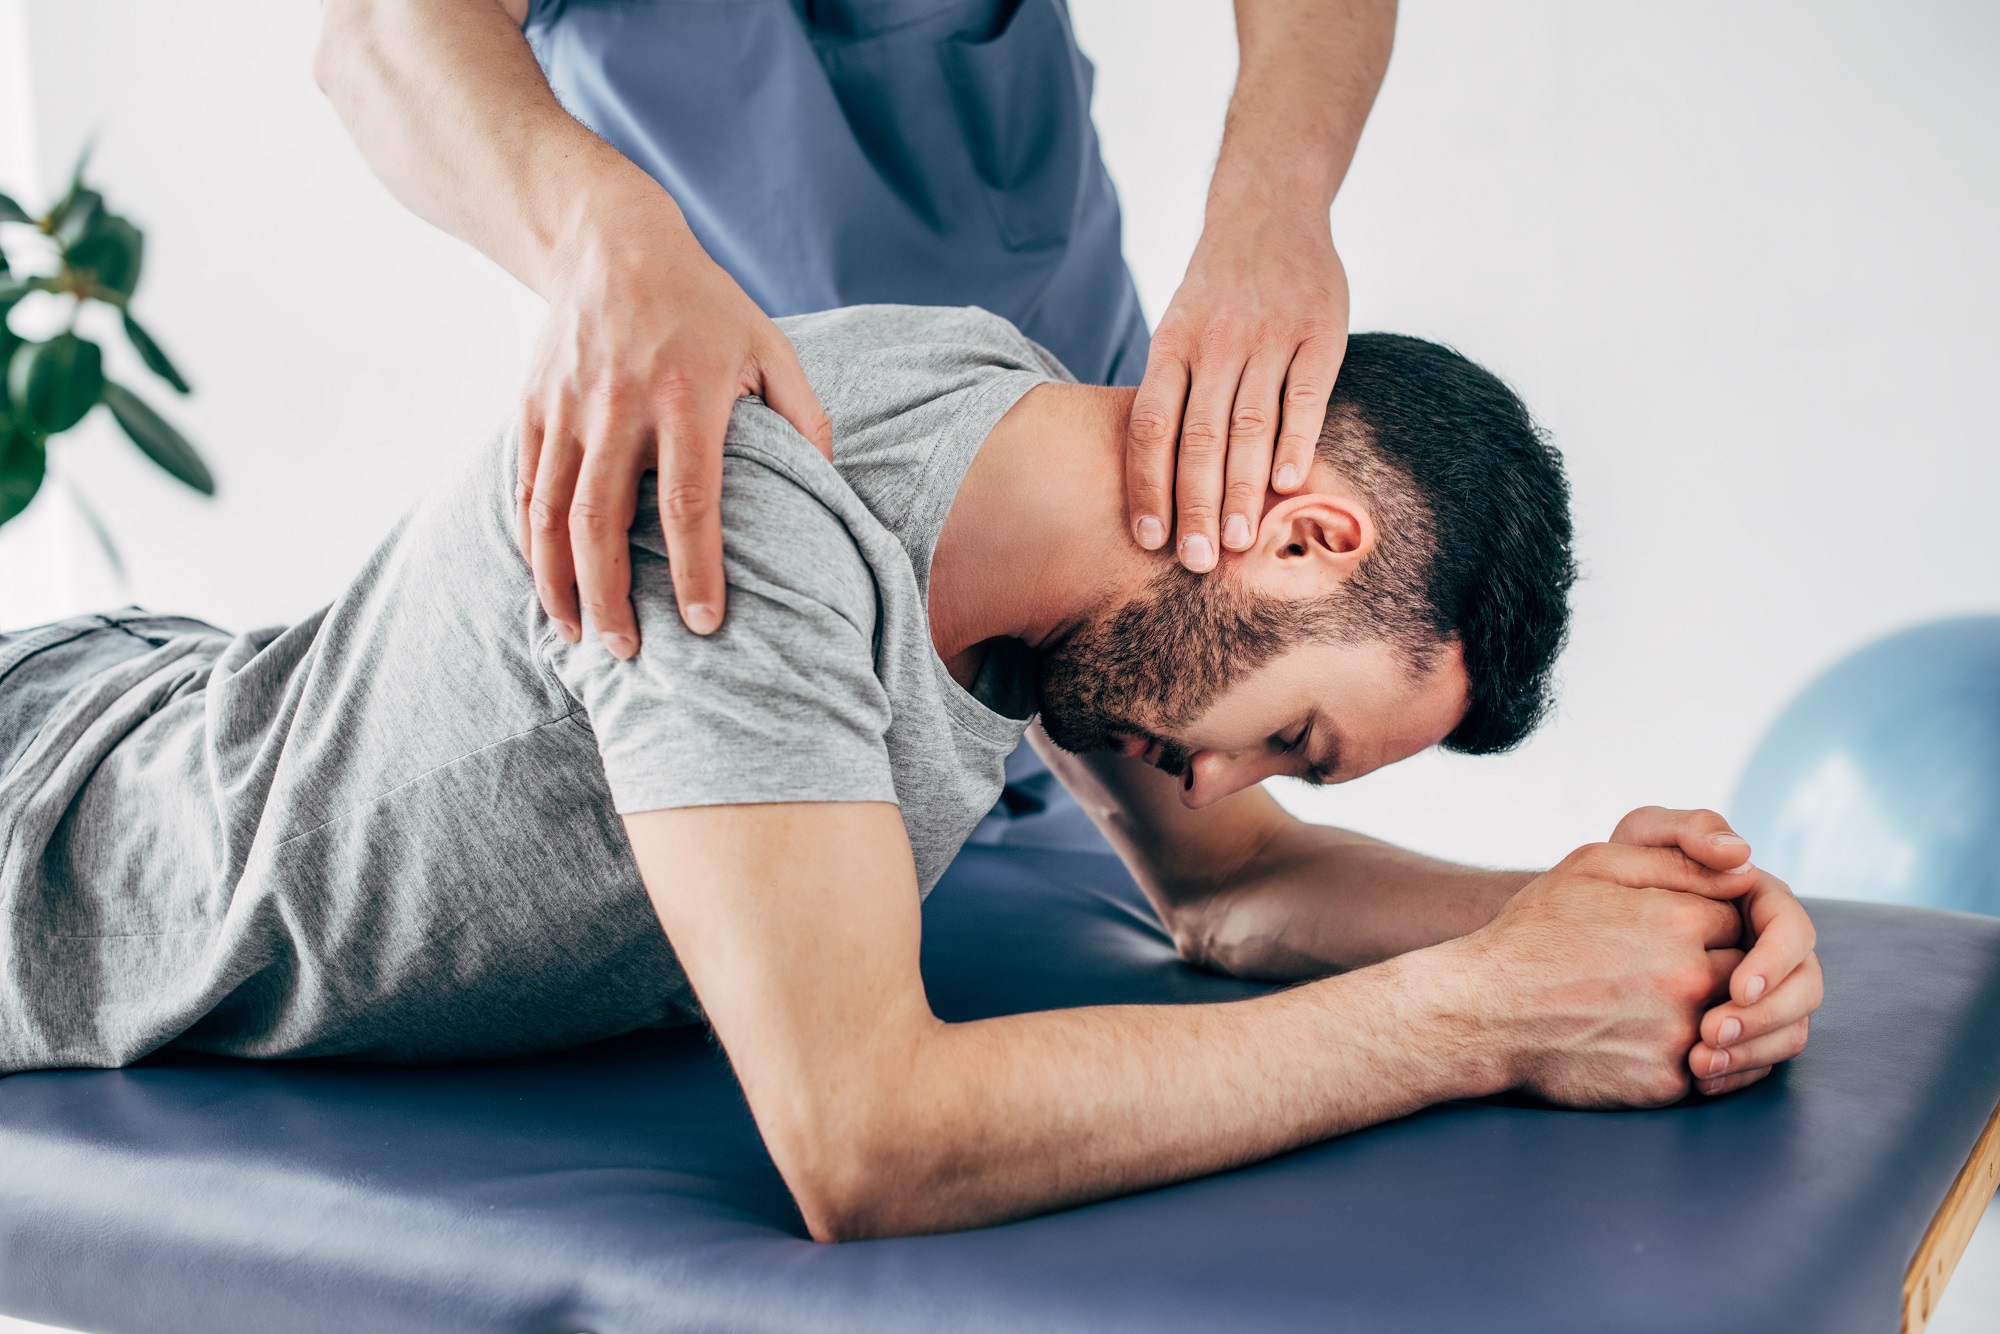 Chiropractor And Male Patient